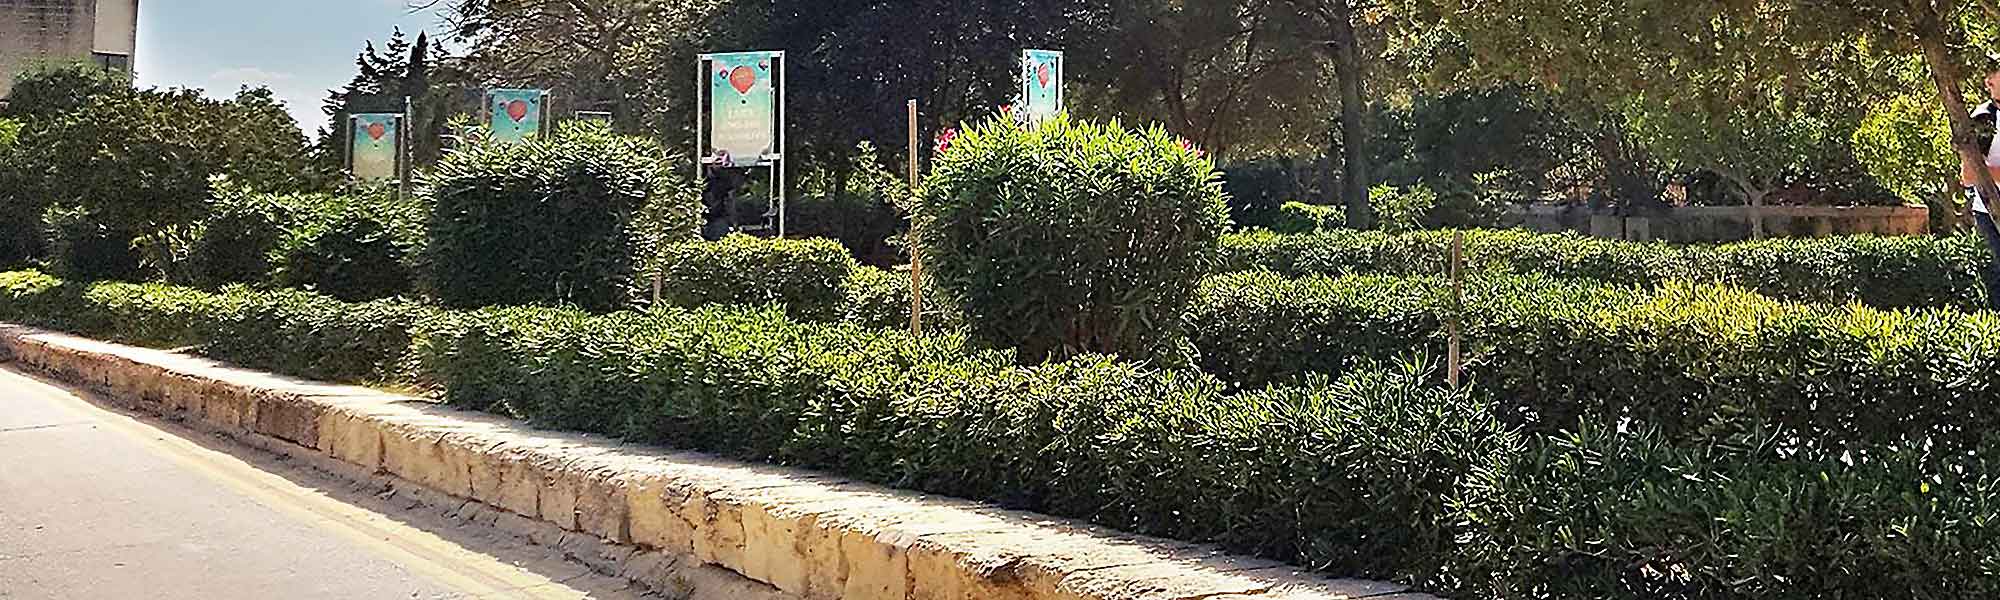 Trimmed grass hedges and shrubs on campus